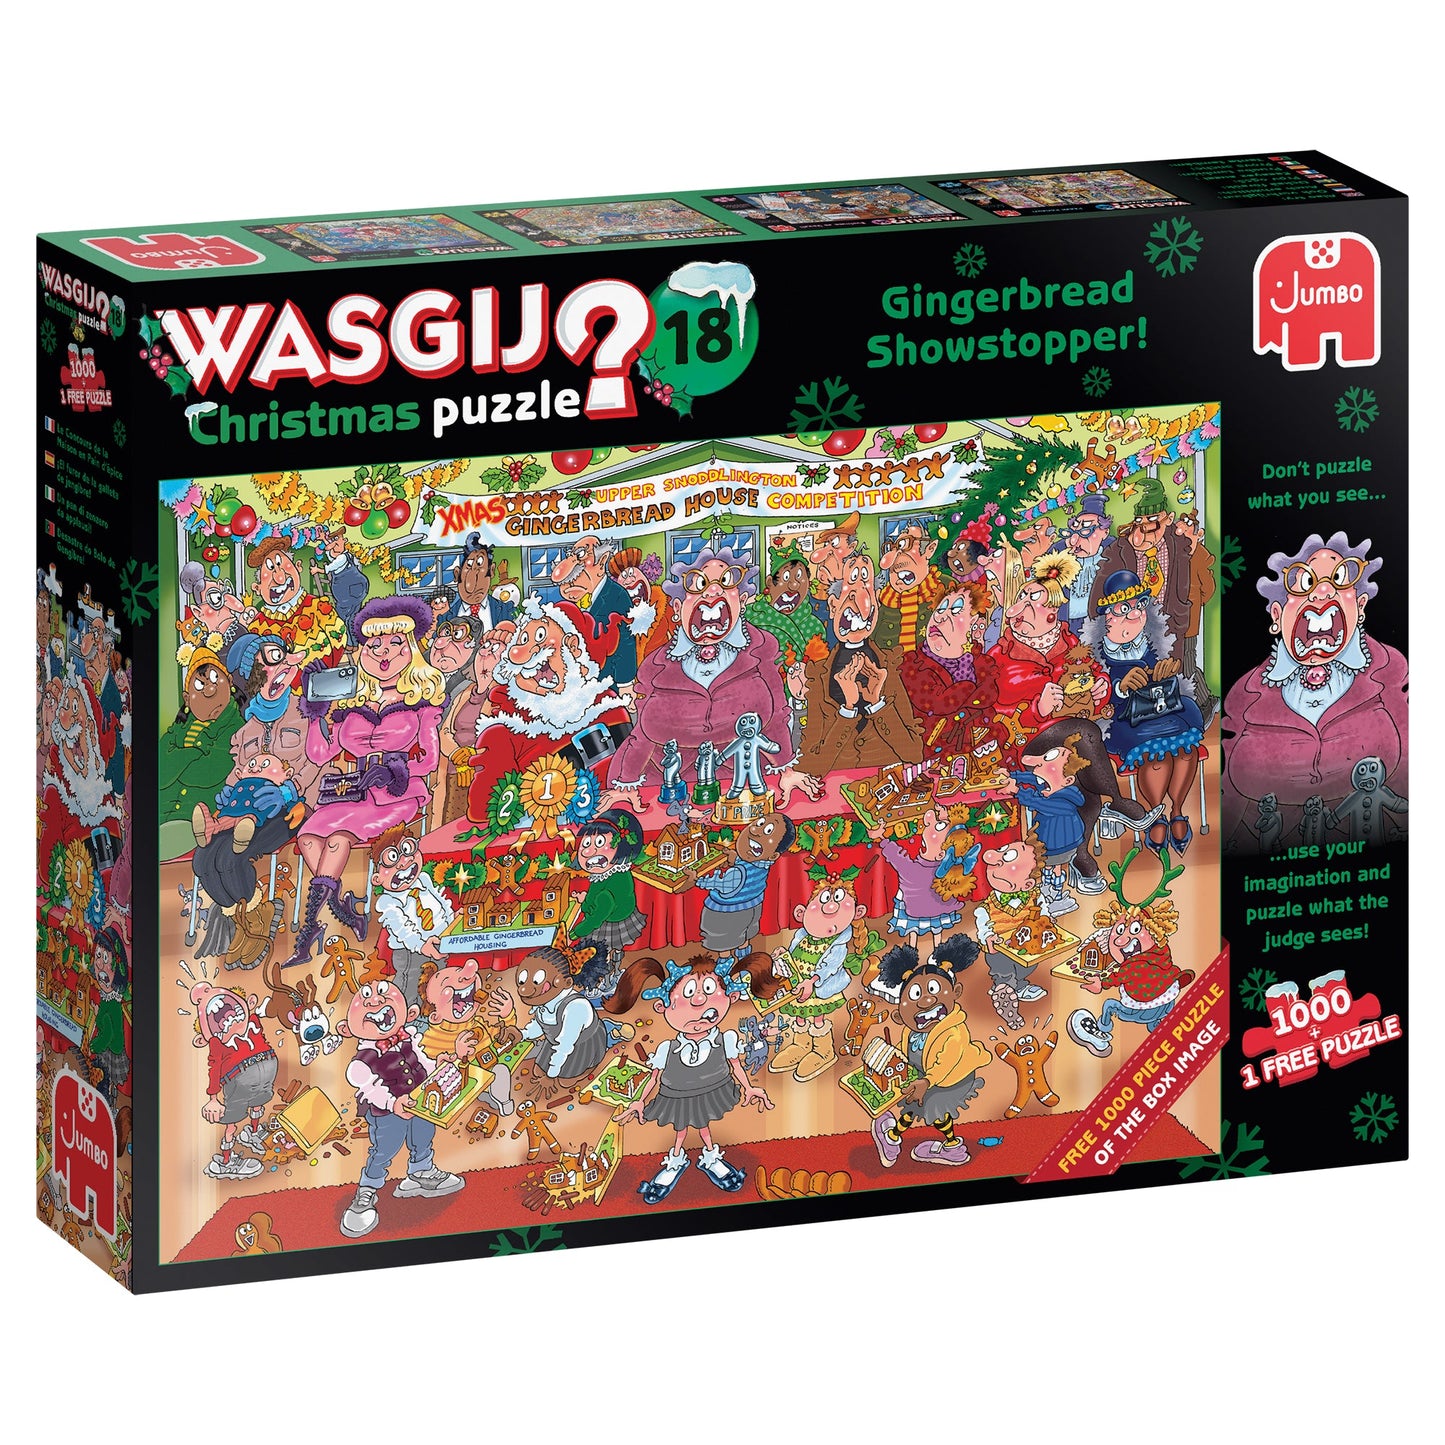 Wasgij Christmas 18 Gingerbread Showstopper 1000 Piece Jigsaw Puzzle box 4